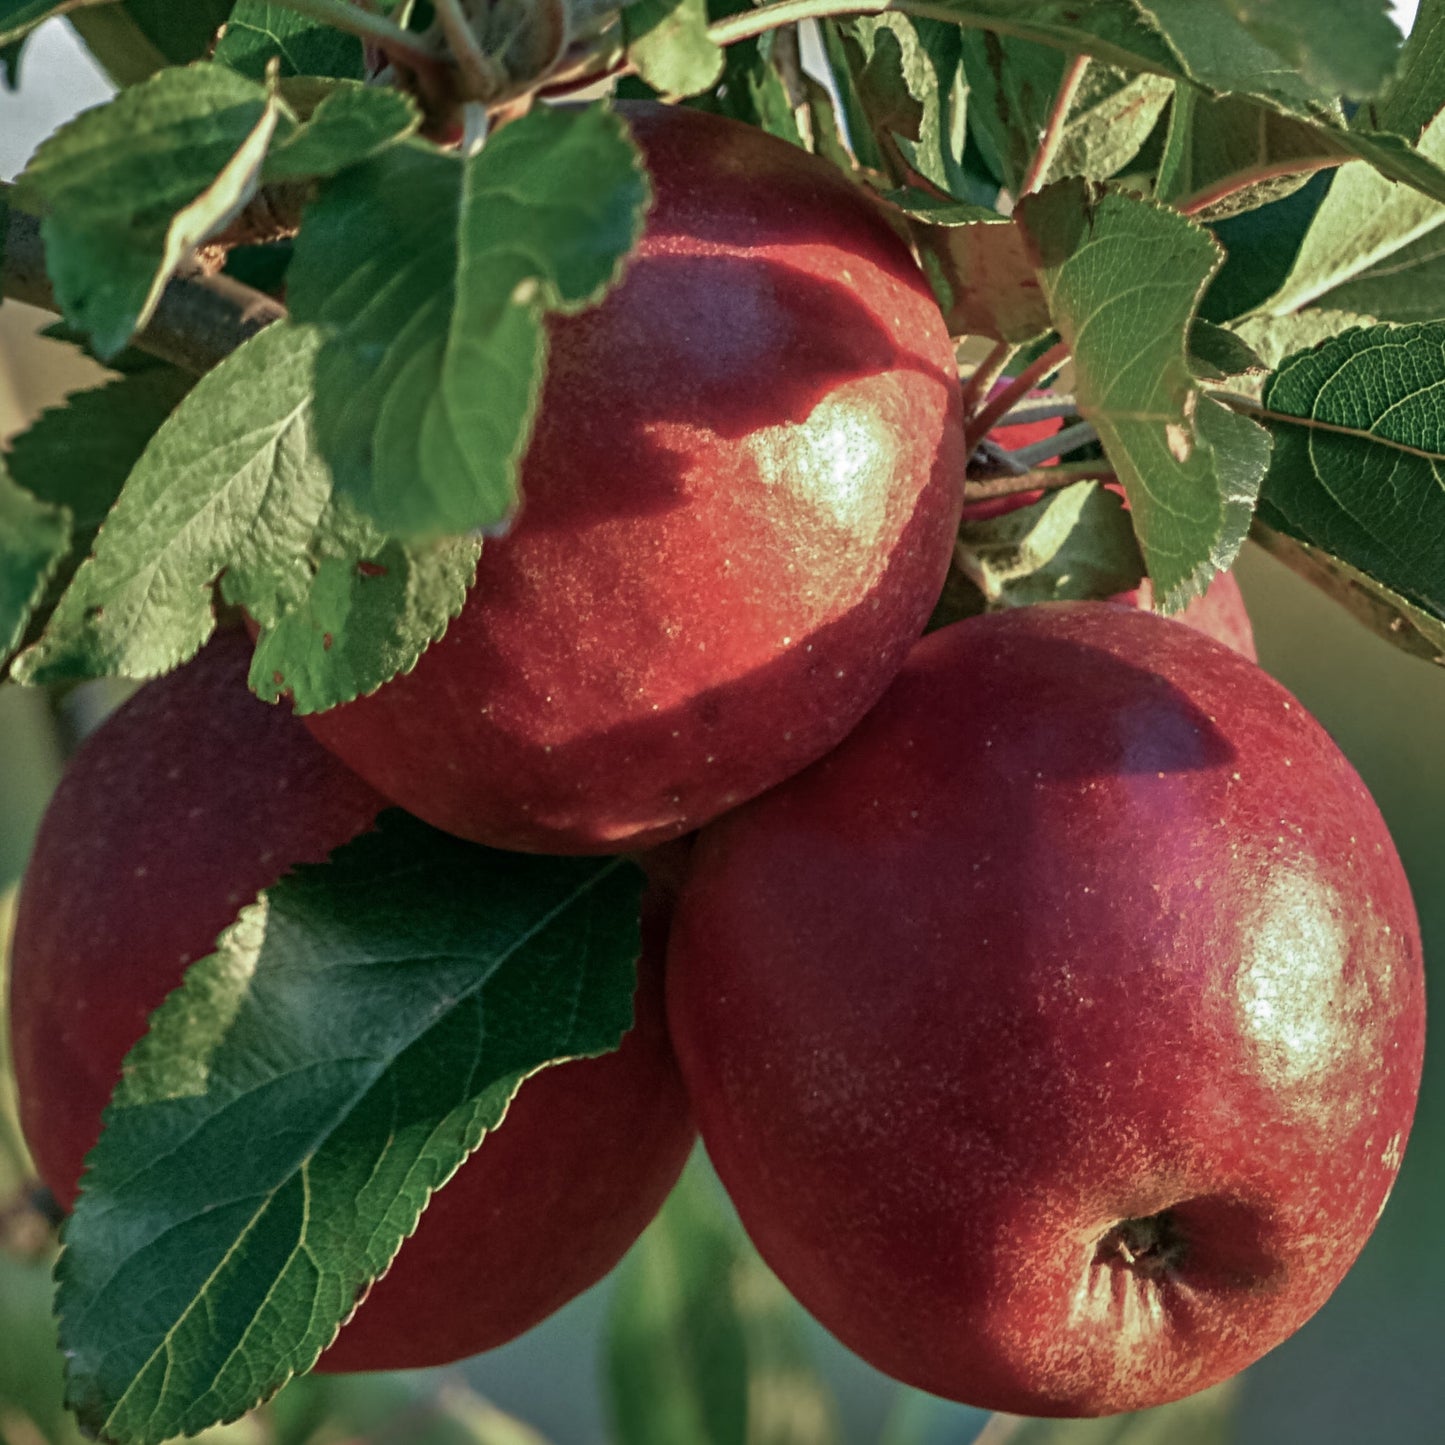 Close-up view of three red Zestar apples. 